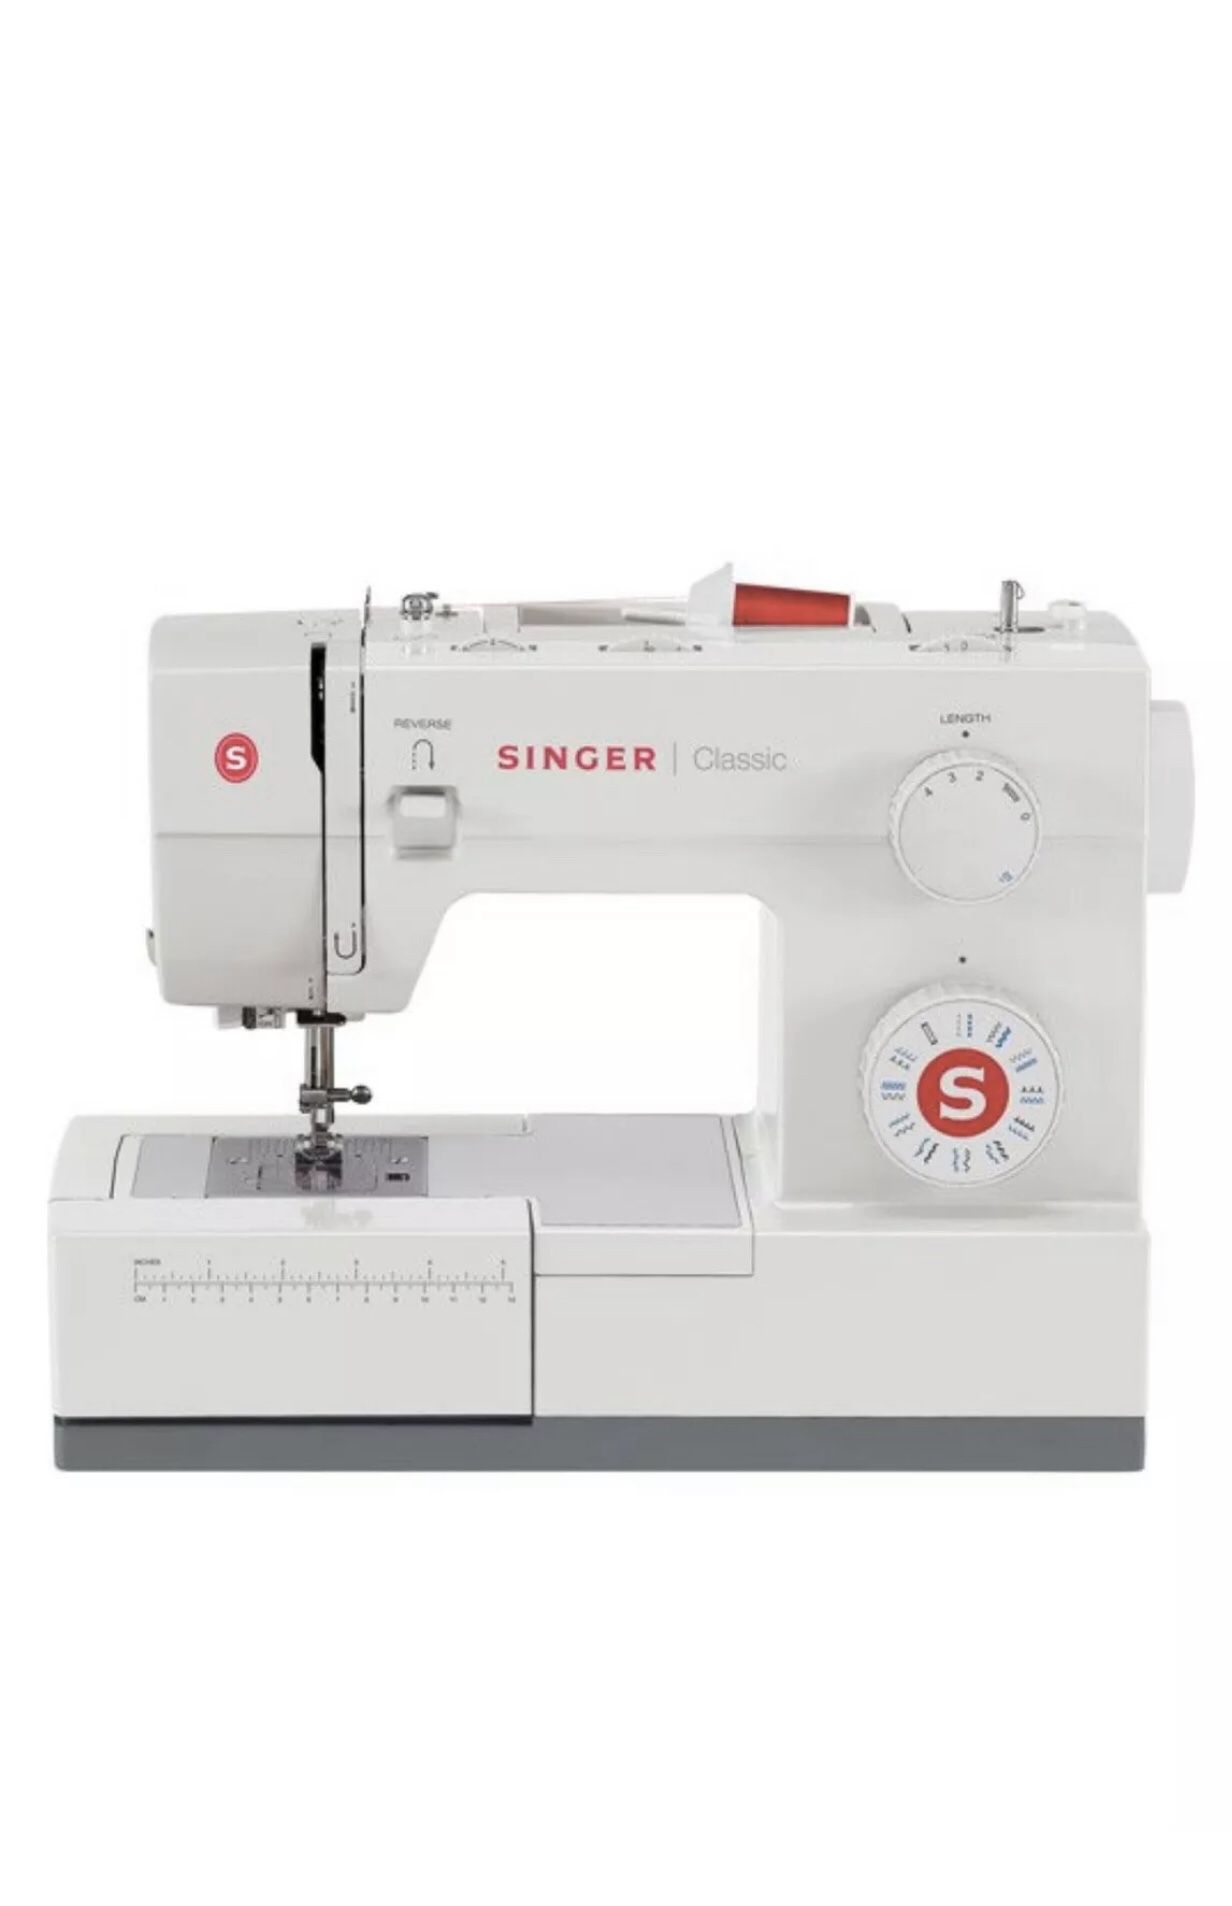 Brand New SINGER 44S Sewing Machine With 23 Built-in Stitches